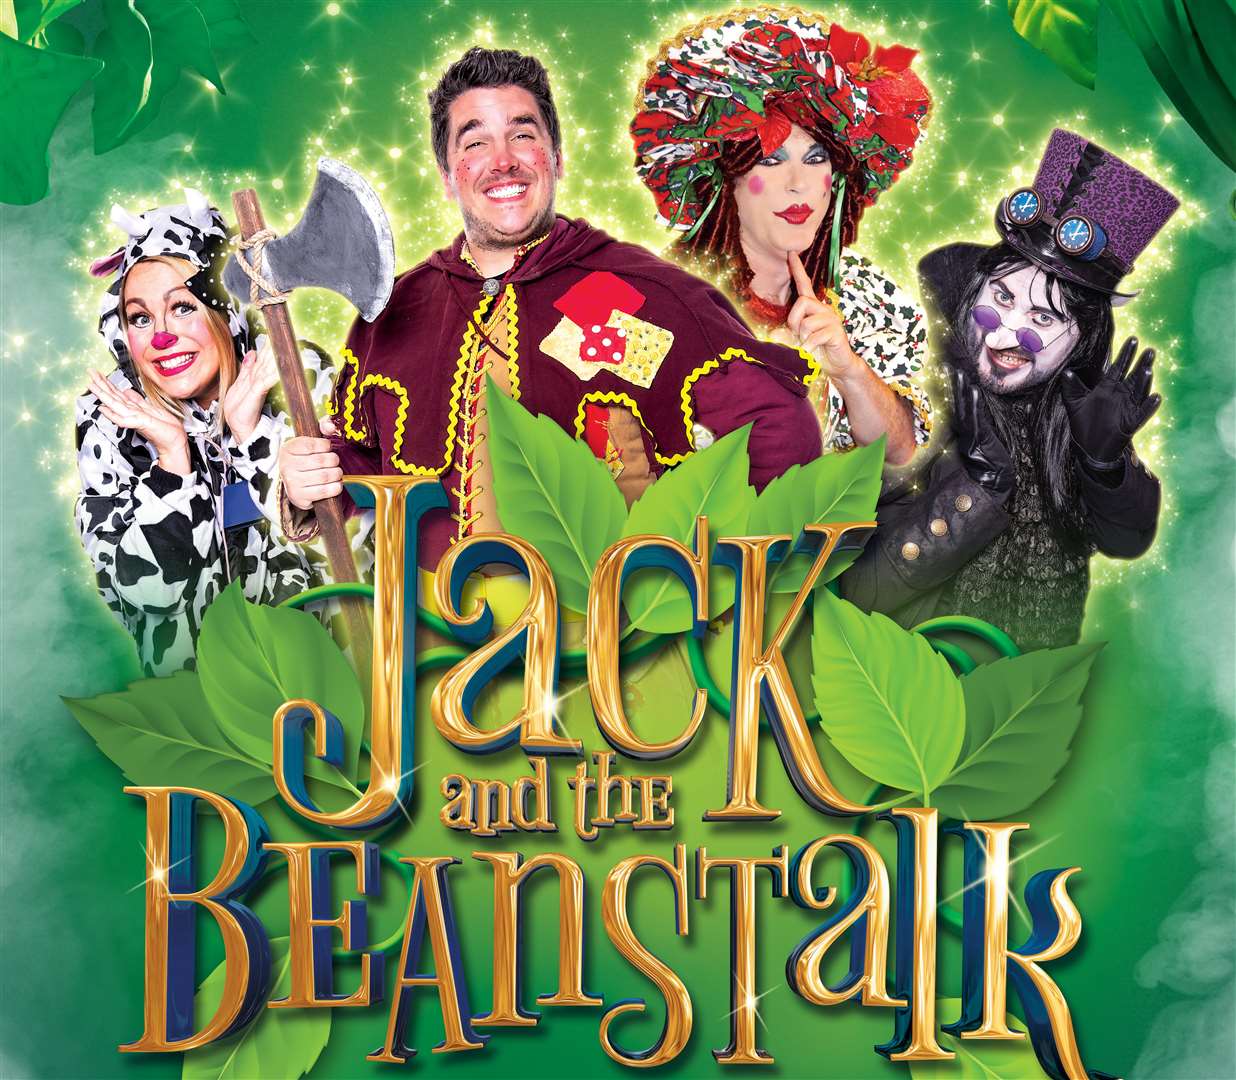 Jack and the Beanstalk will be at EM Forster Theatre in Tonbridge